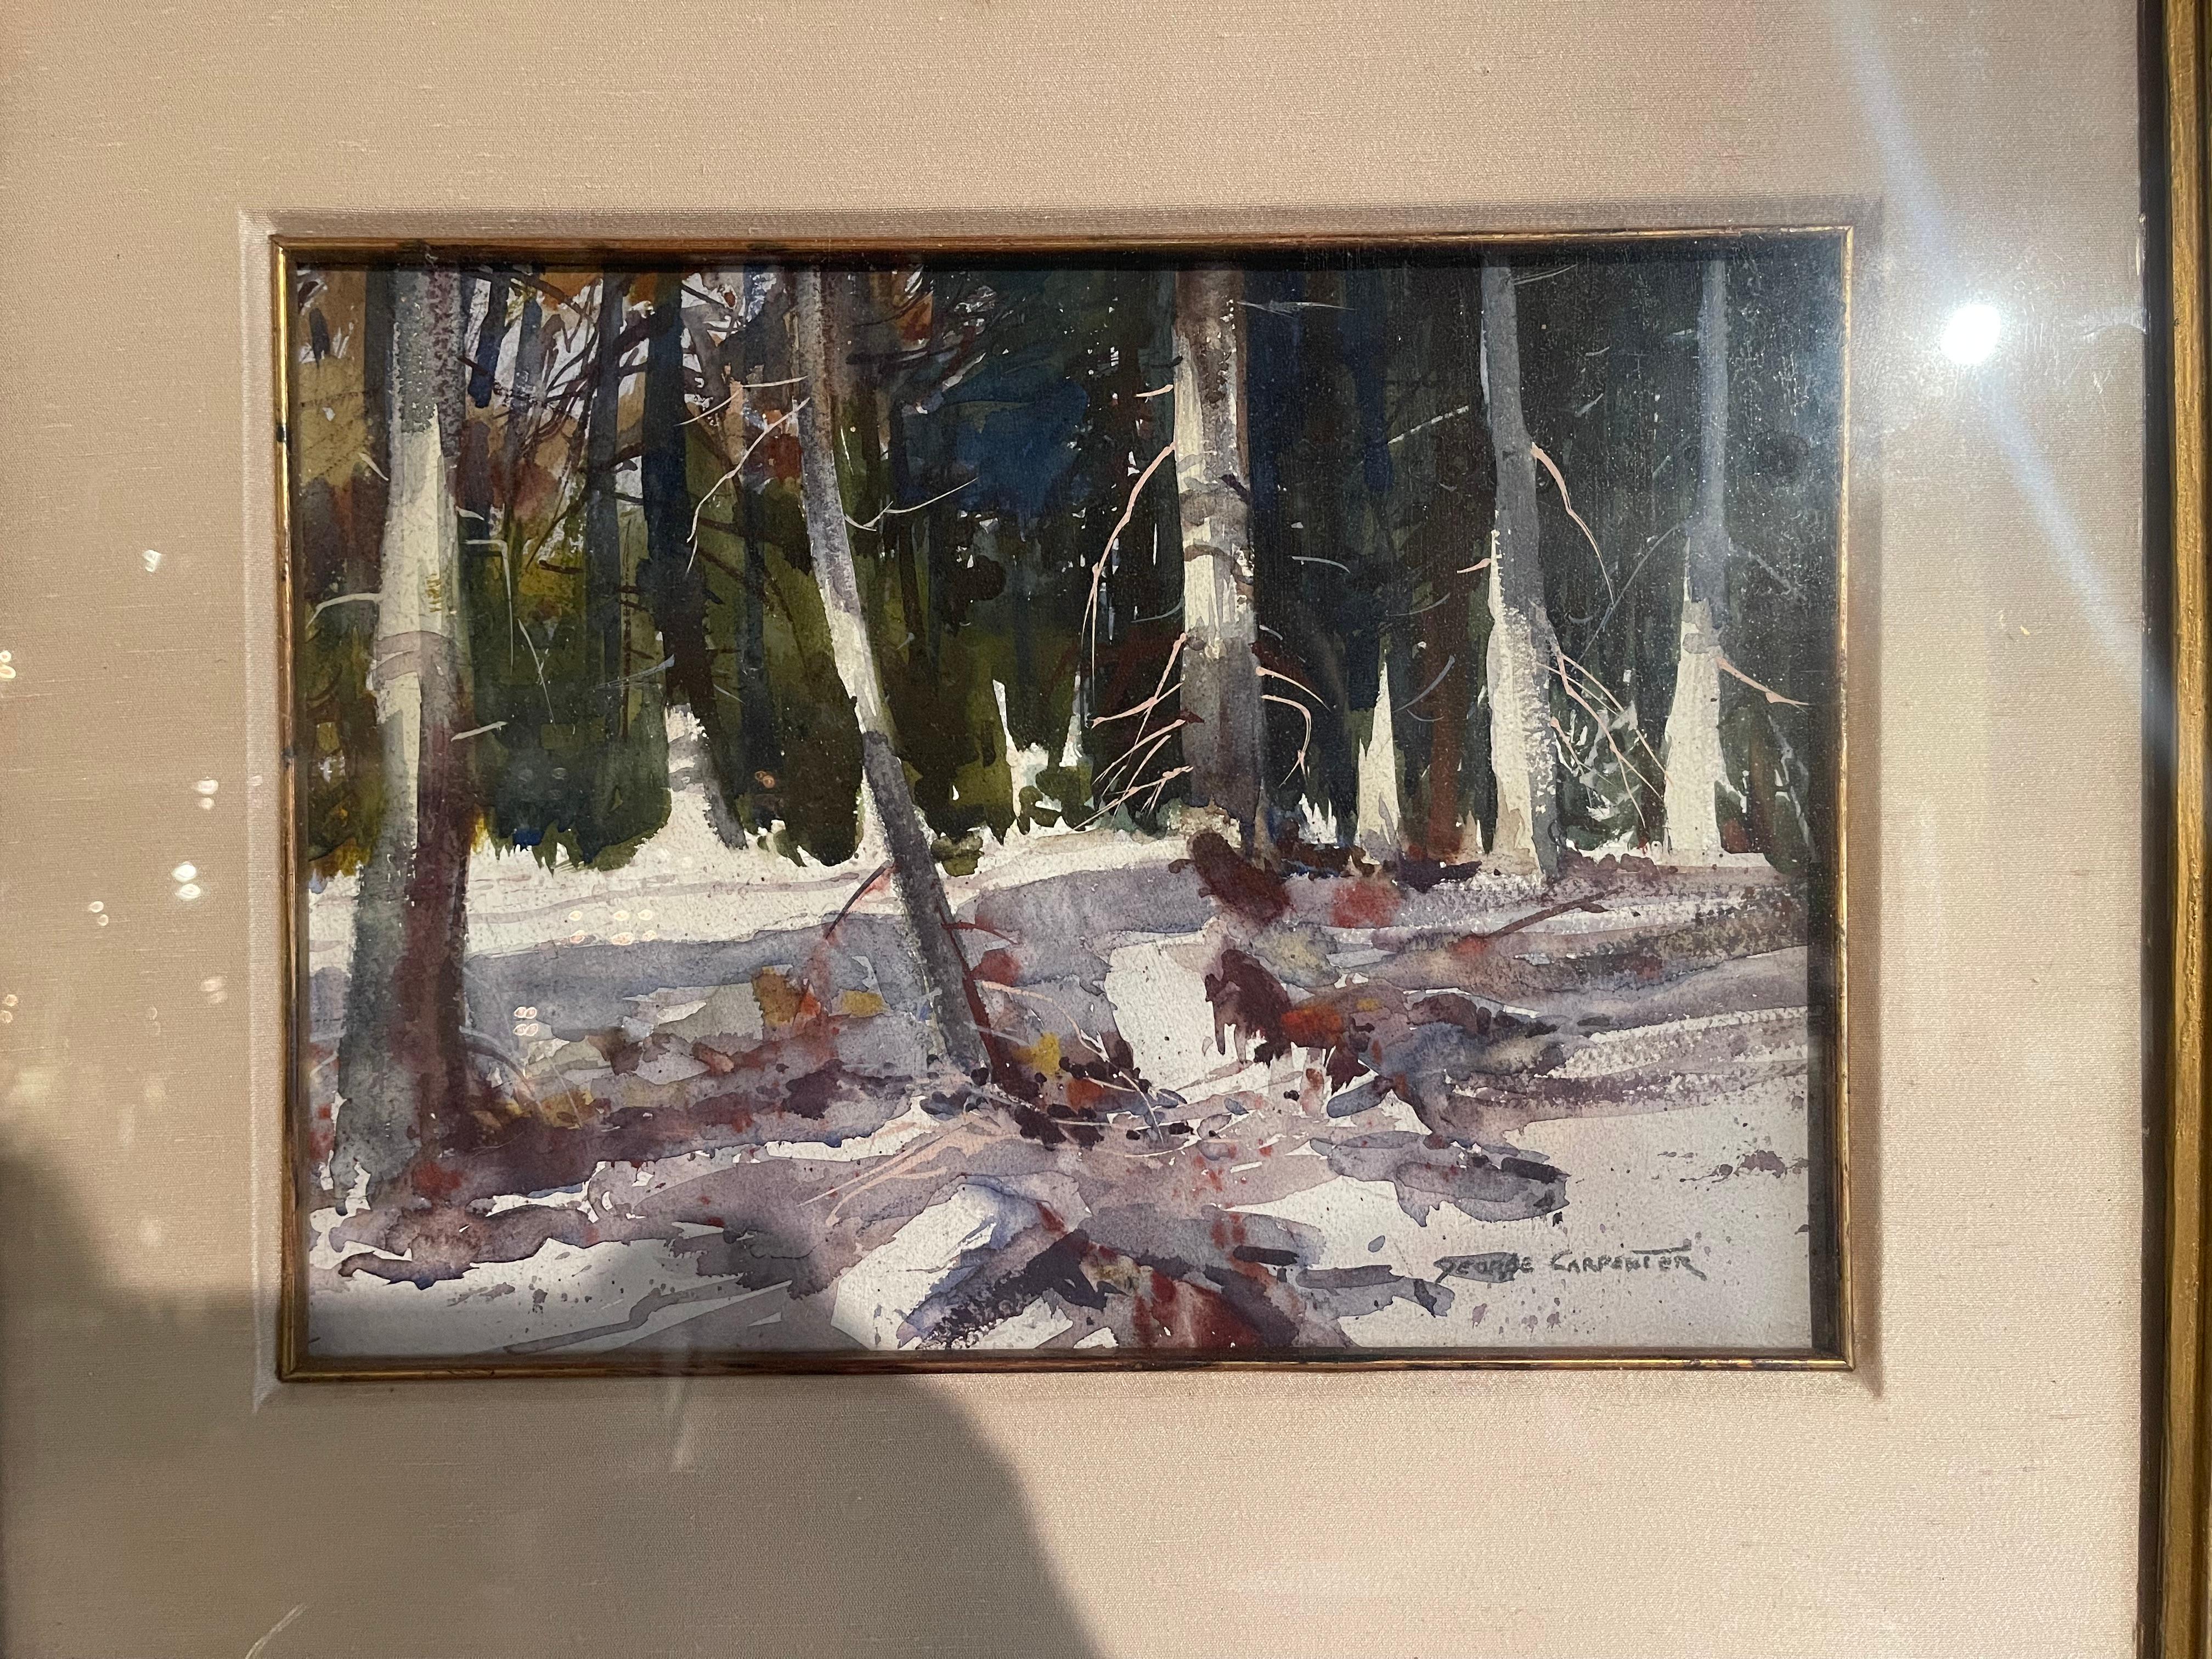 Set inside a carved gilt framed behind protective glass, this watercolor on paper painting was created circa 1970 and signed in the lower right corner by the artist, George Carpenter. The peaceful artwork has a simple composition with a thick forest